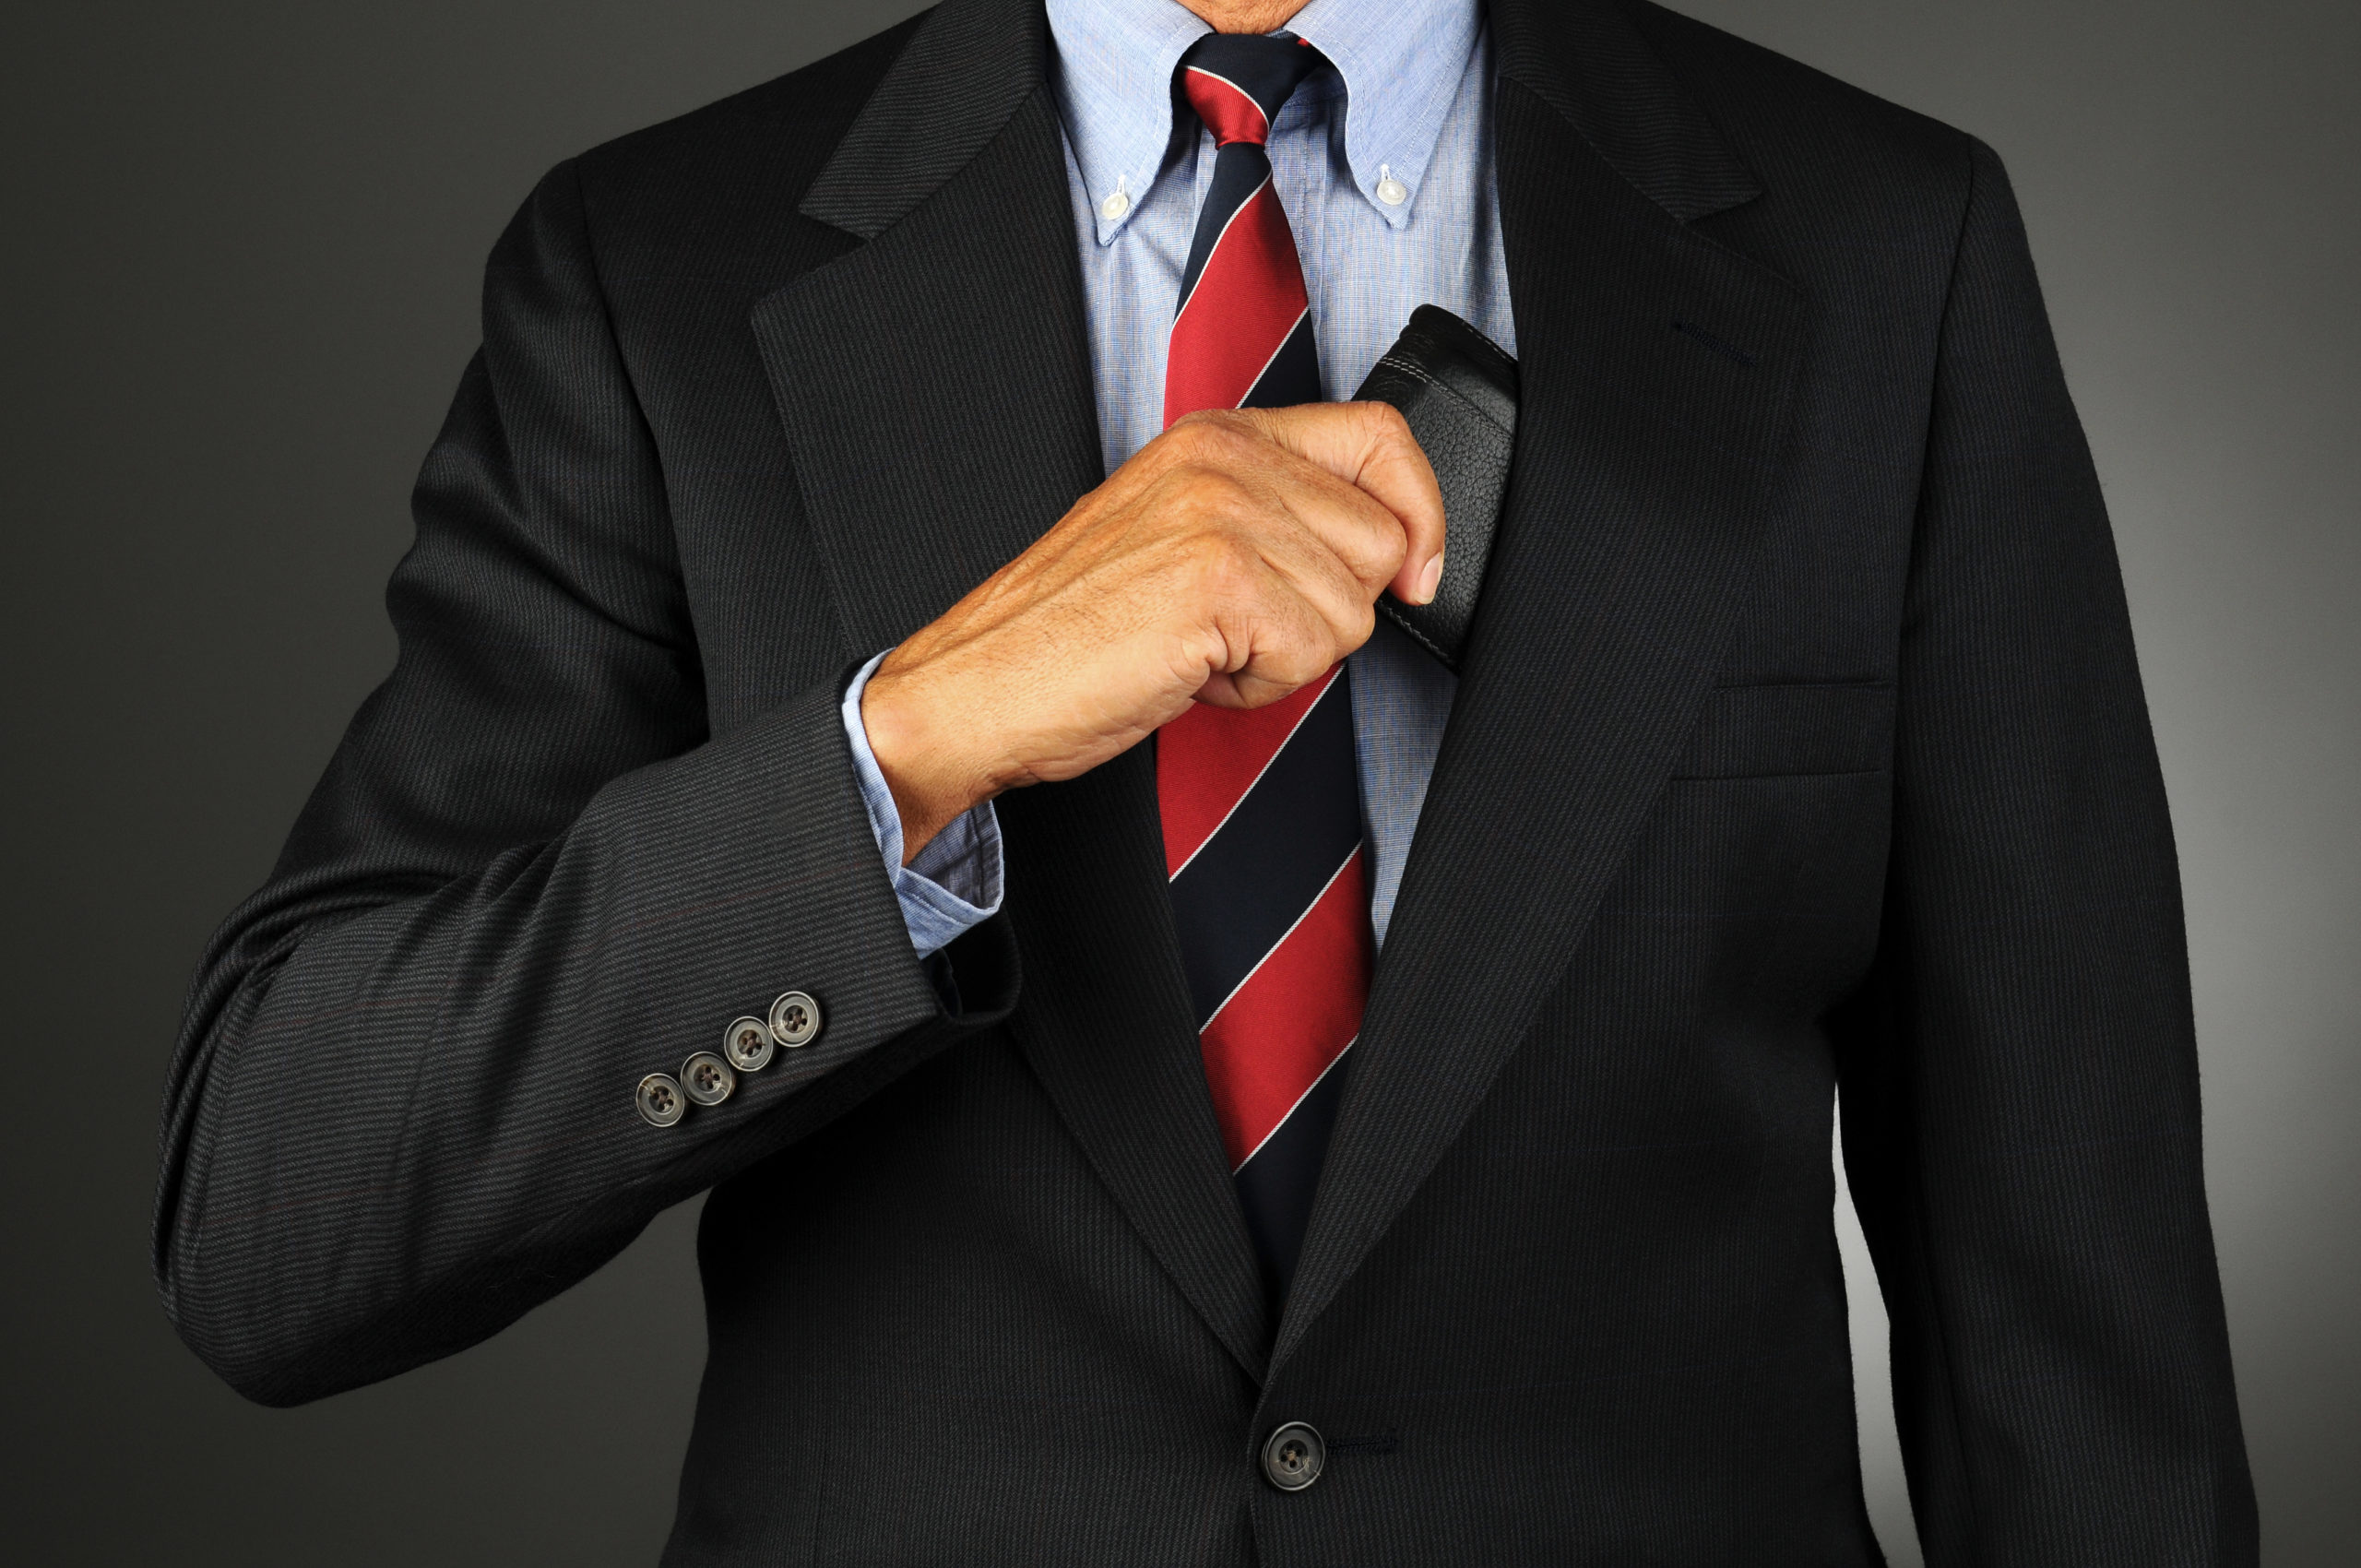 Closeup of a businessman reaching into his coat pocket to get his wallet. Horizontal format over a light to dark gray background. Man is unrecognizable.